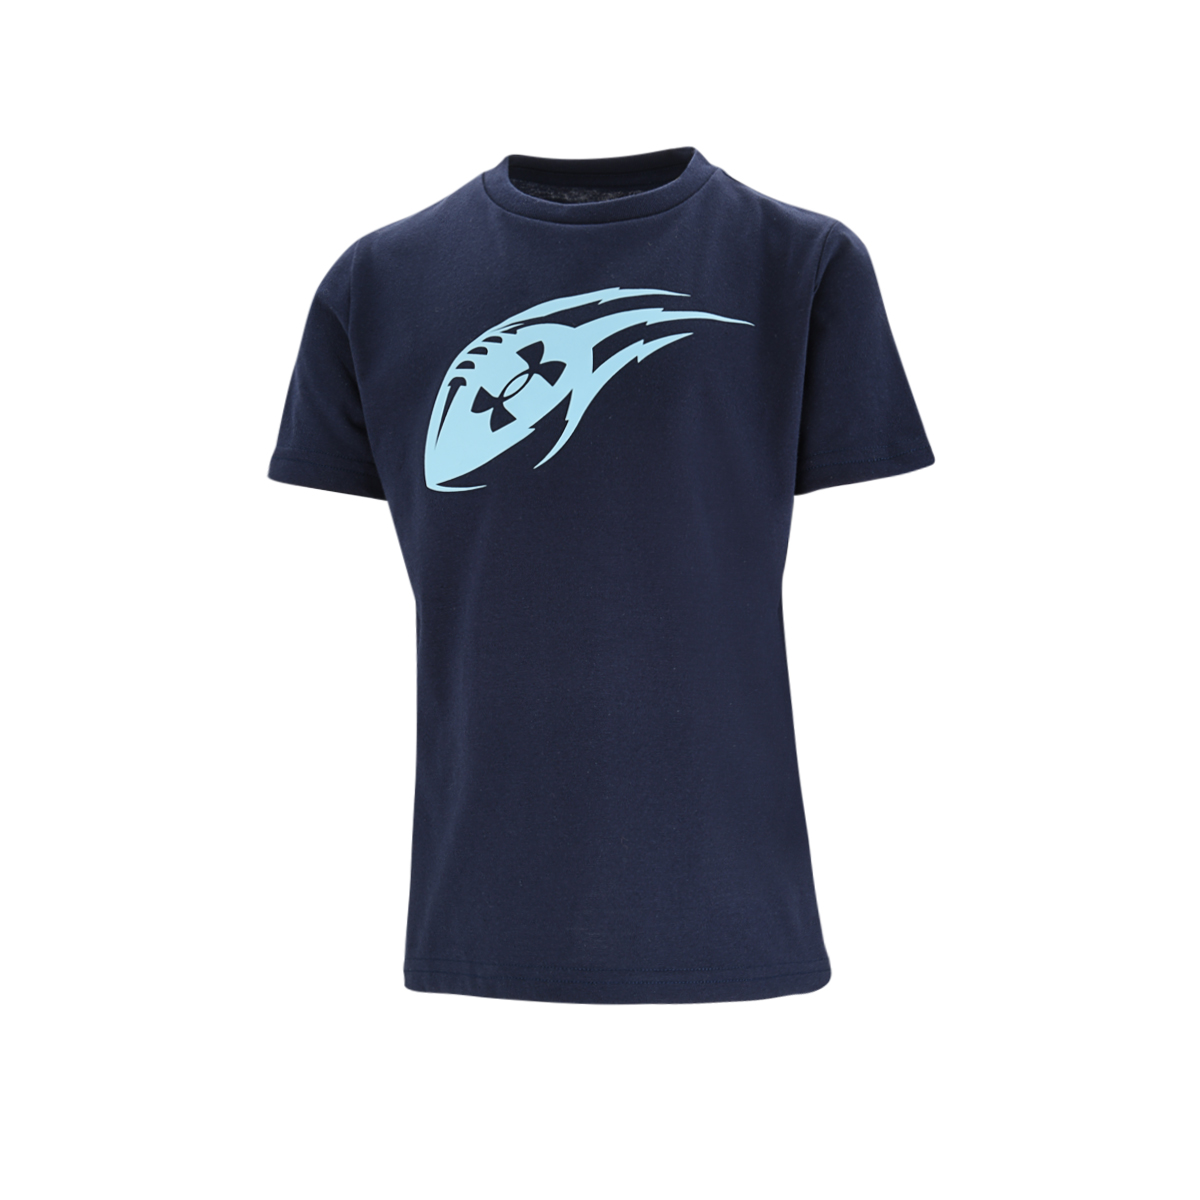 Remera Under Armour Football Icon Niño,  image number null